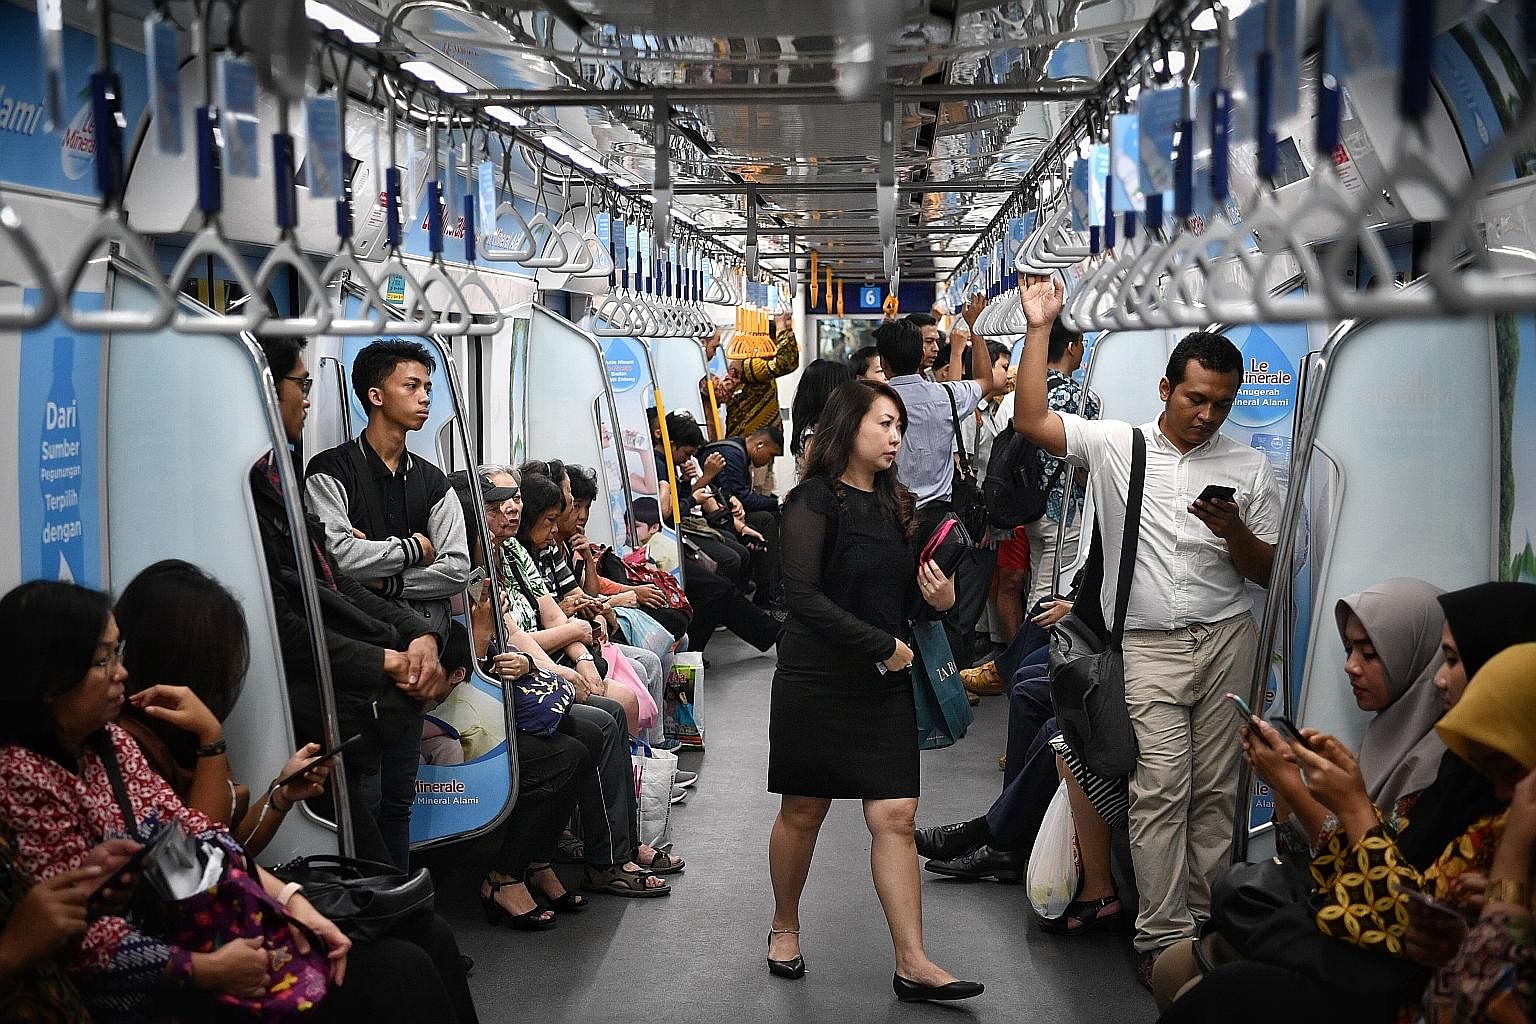 Commuters on a Jakarta subway train yesterday. The MRT has been highly politicised, with President Joko Widodo lauded for his role in pushing the project through while he was Jakarta governor from 2012 to 2014. But his detractors say credit should go